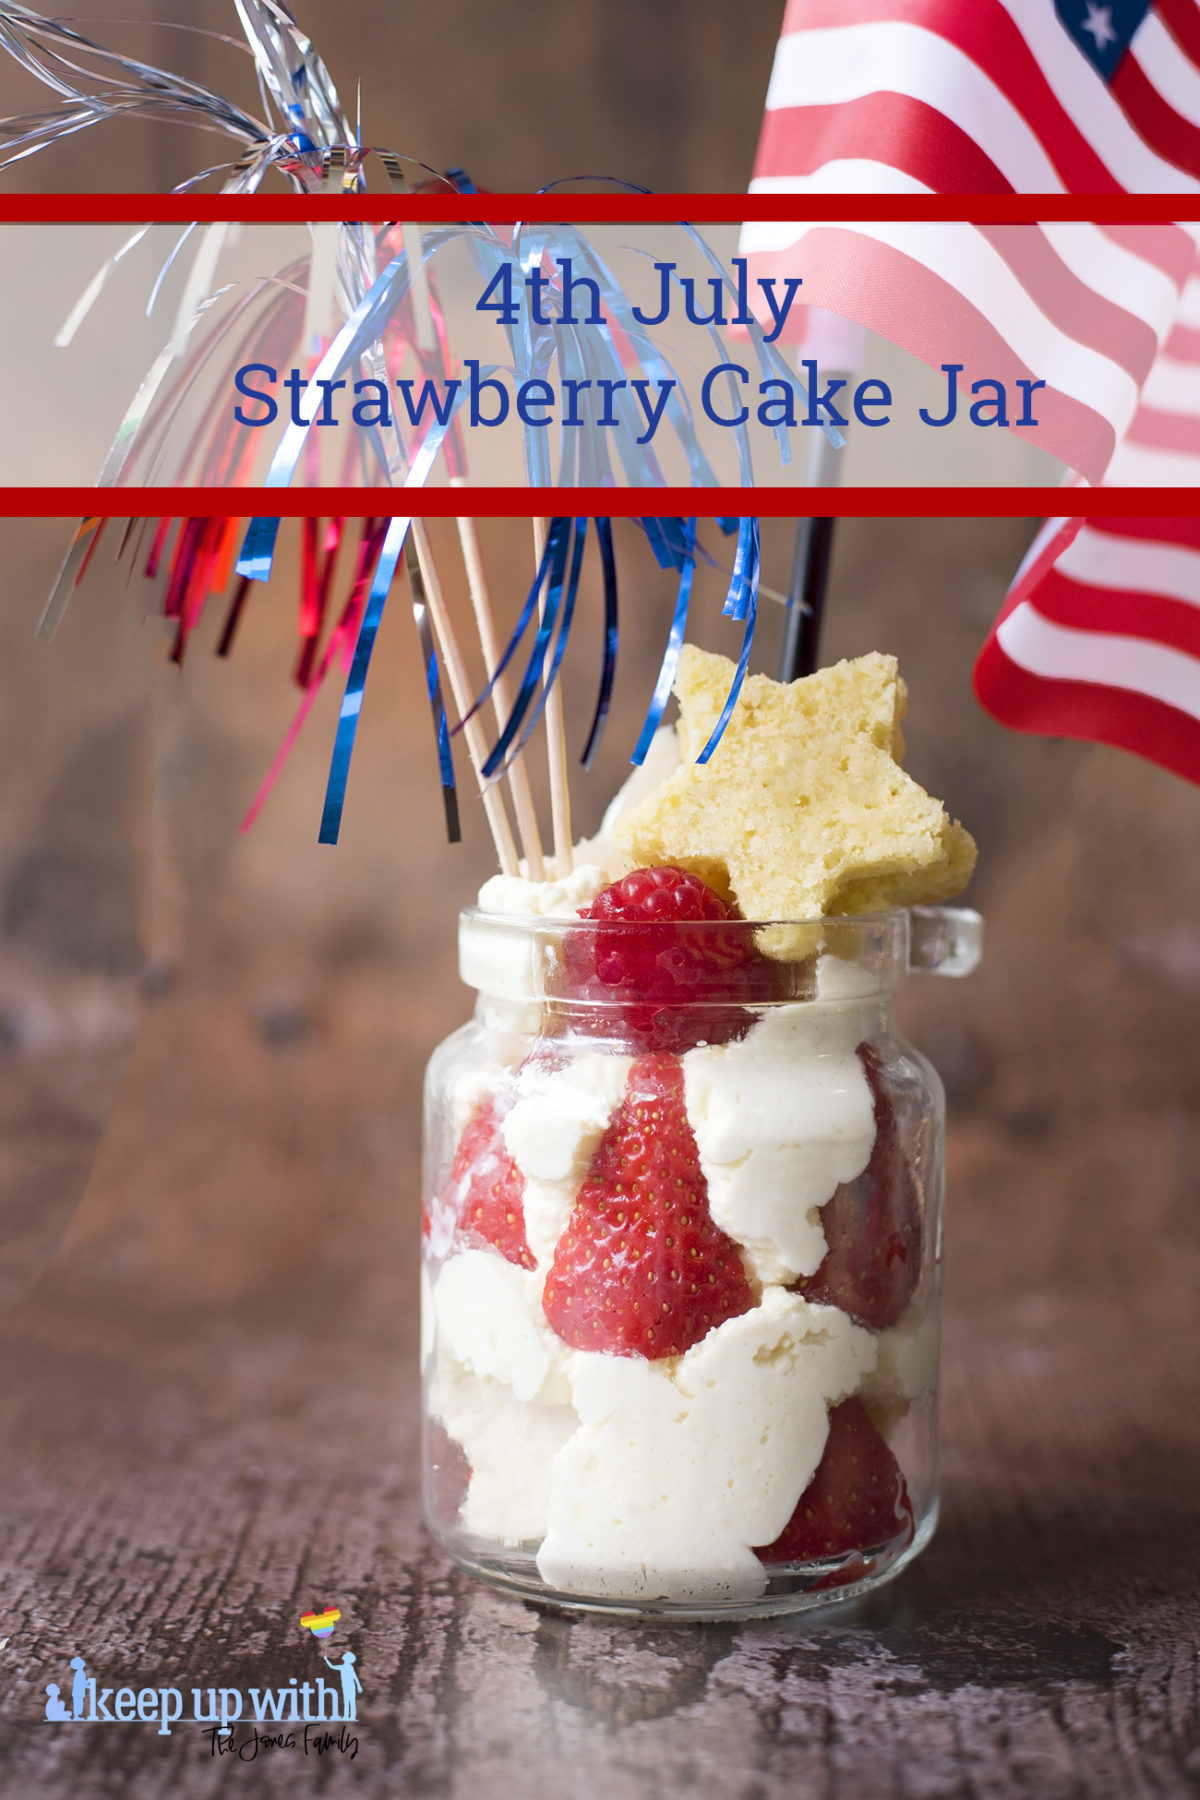 Image shows a 4th July Strawberry Cake Jar dessert on a dark wooden tabletop. The jar contains piped whipped cream and strawberries, with stars cut out of vanilla angel cake inside and on top. There is an american flag and three metallic firework sparklers in red, white and blue sticking out of the jar. Image by Sara-Jayne Jones of Keep Up With The Jones Family.